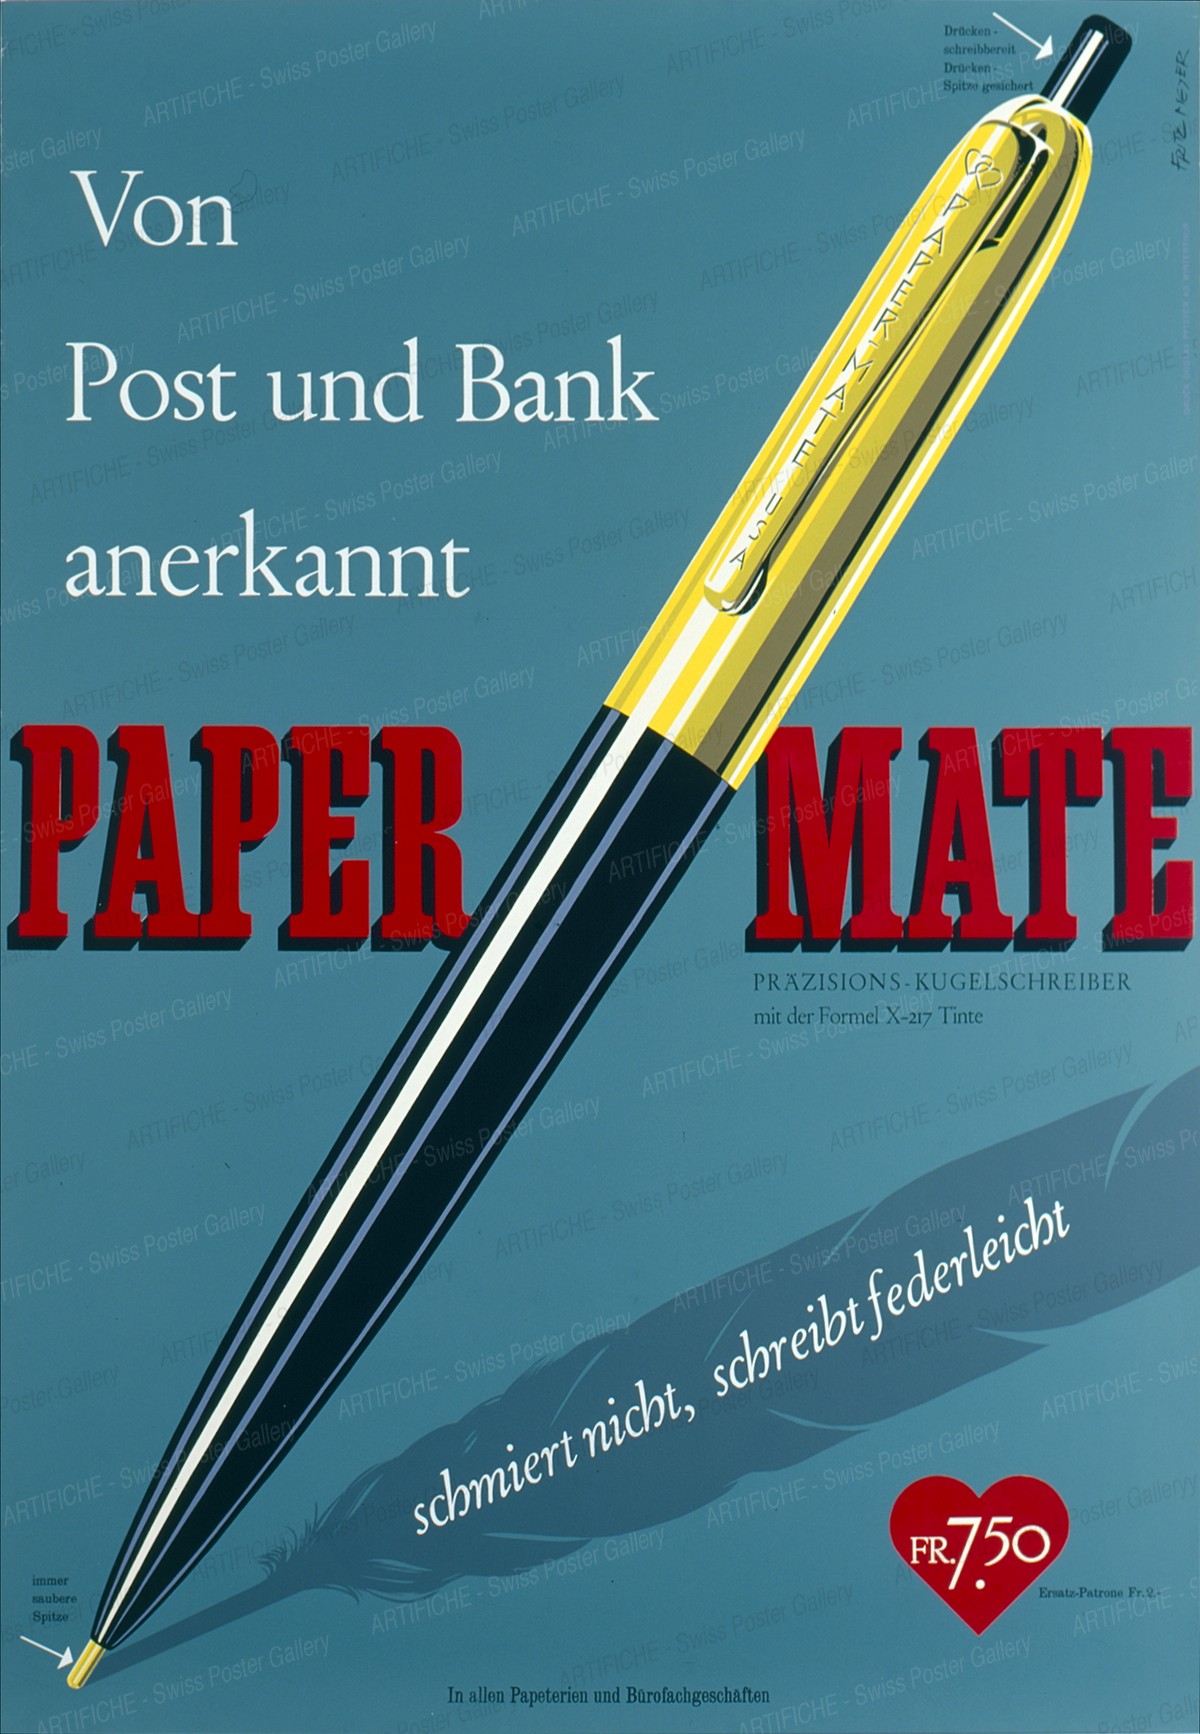 Paper-Mate – accepted by banks & post offices, Fritz Meyer